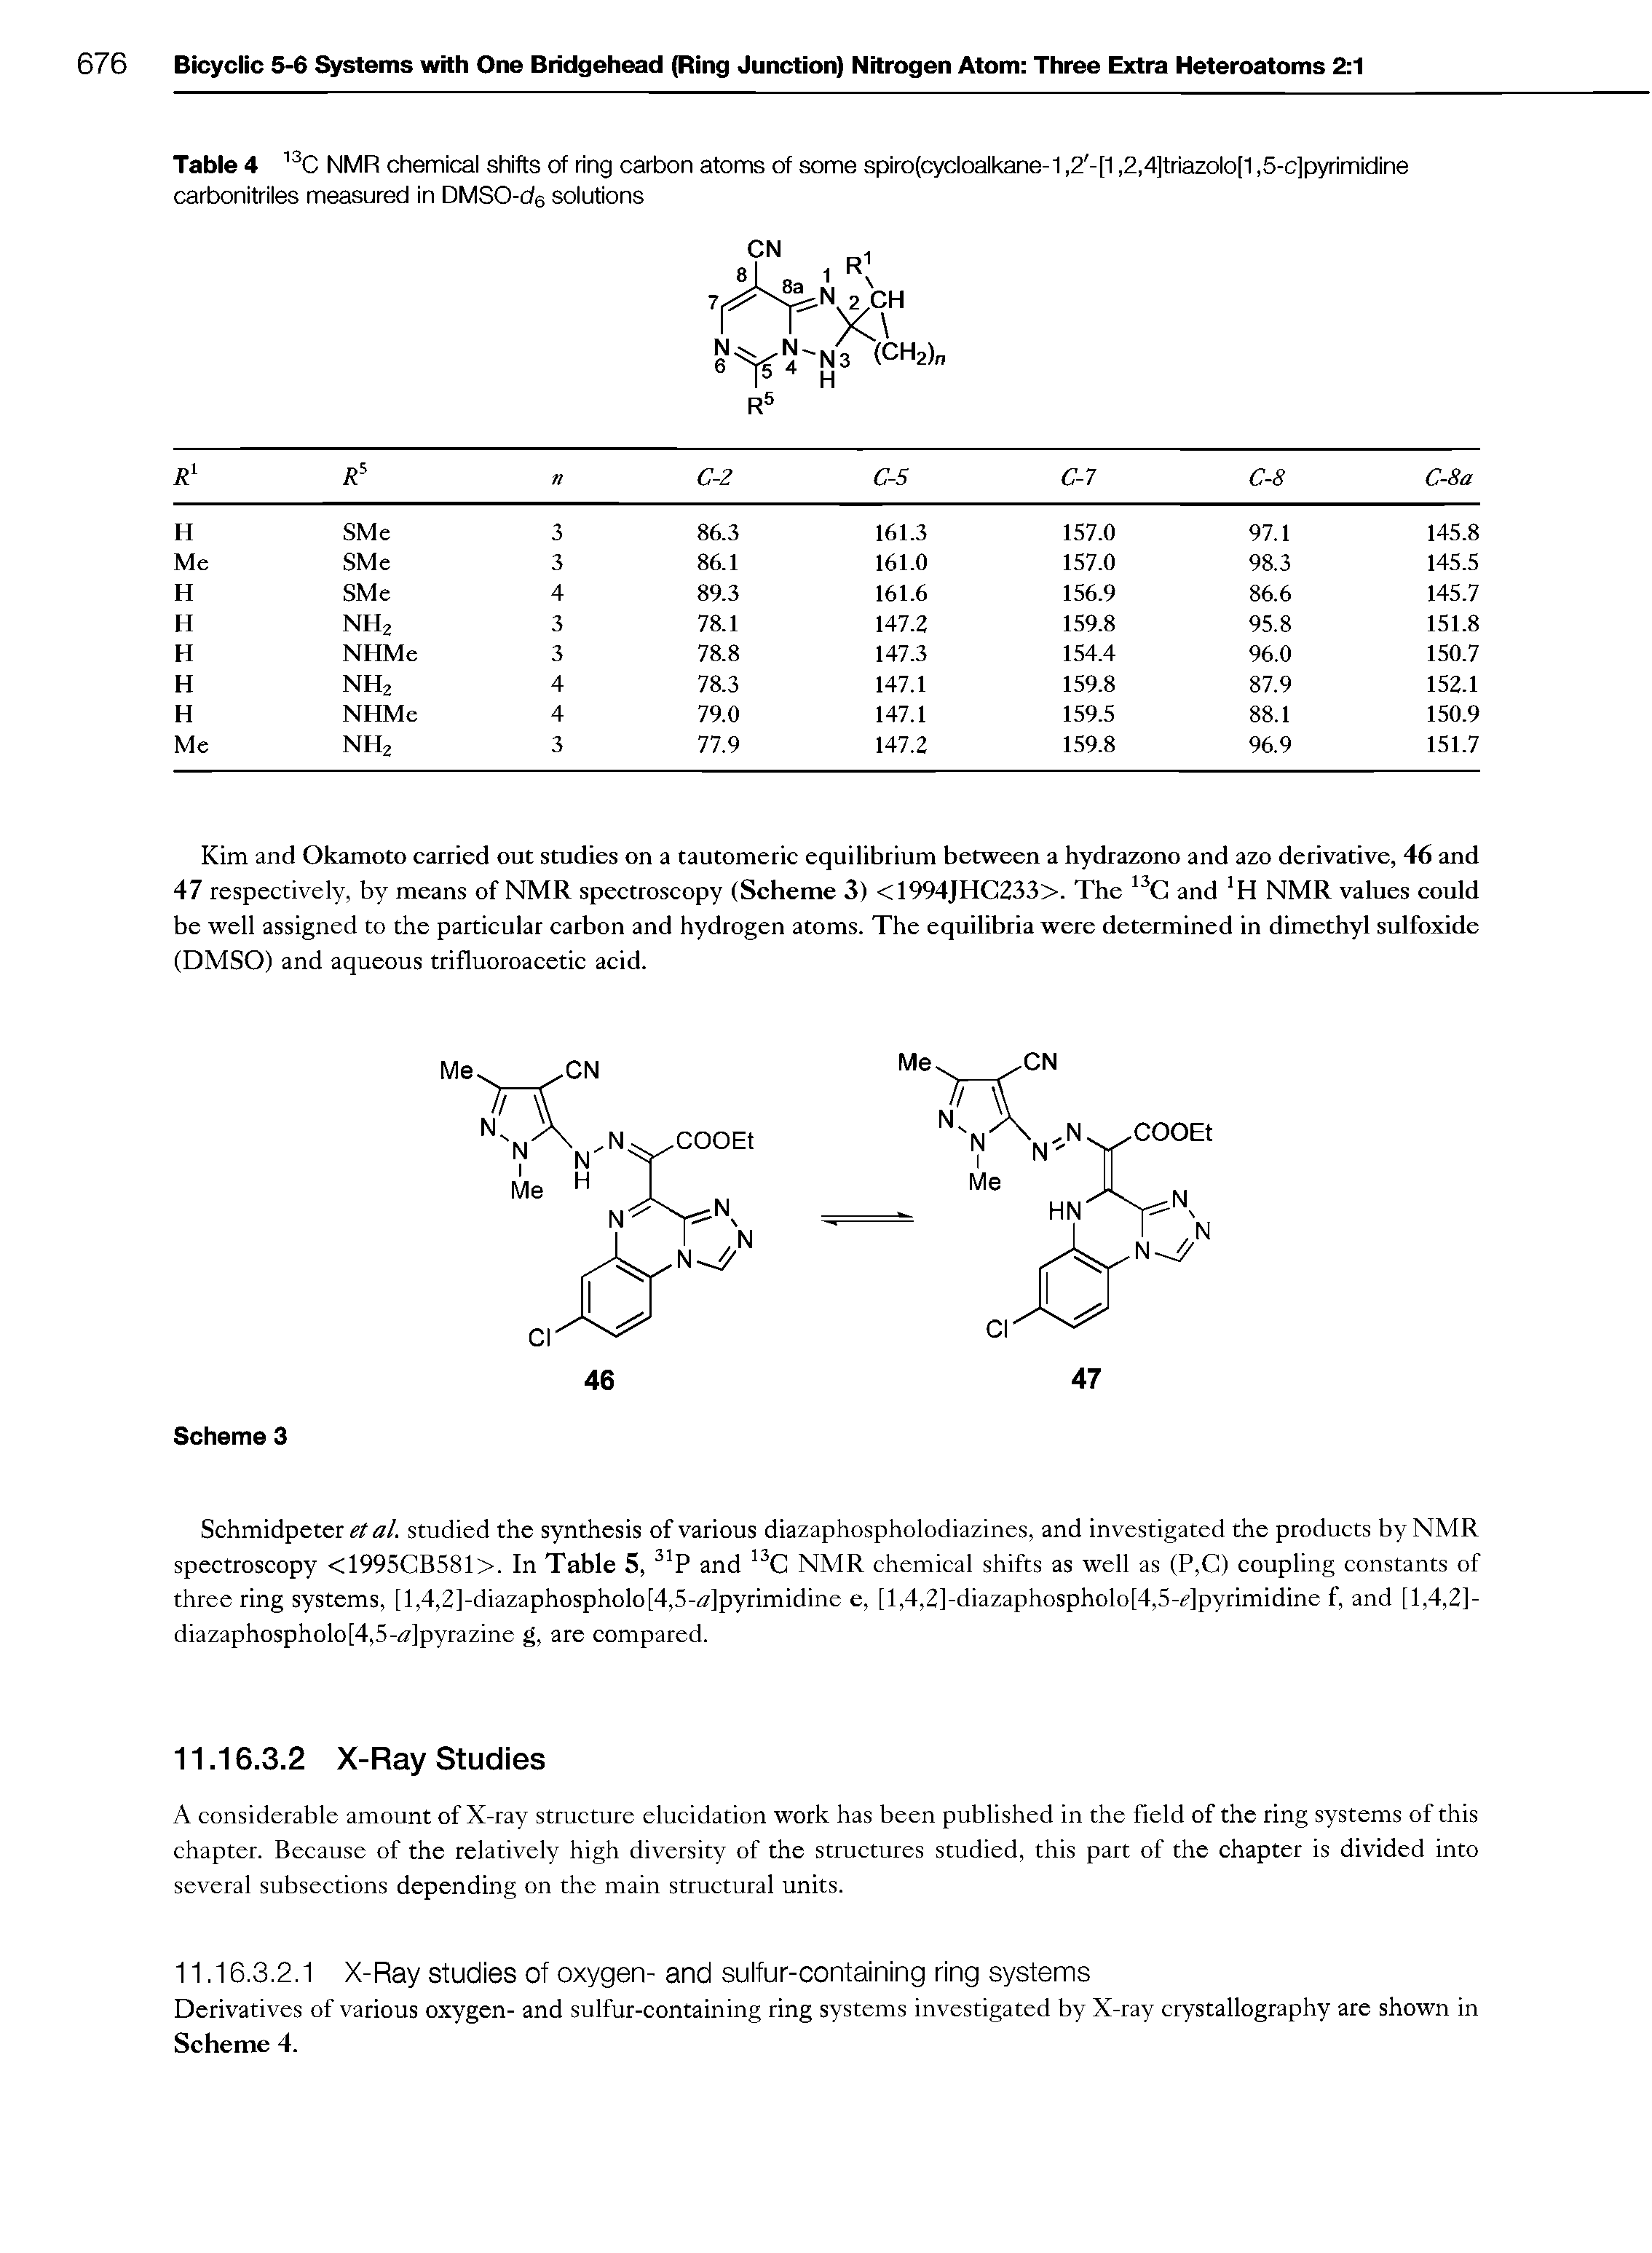 Table 4 13C NMR chemical shifts of ring carbon atoms of some spiro(cycloalkane-1,2 -[1,2,4]triazolo[1,5-c]pyrimidine carbonitriles measured in DMSO-d6 solutions...